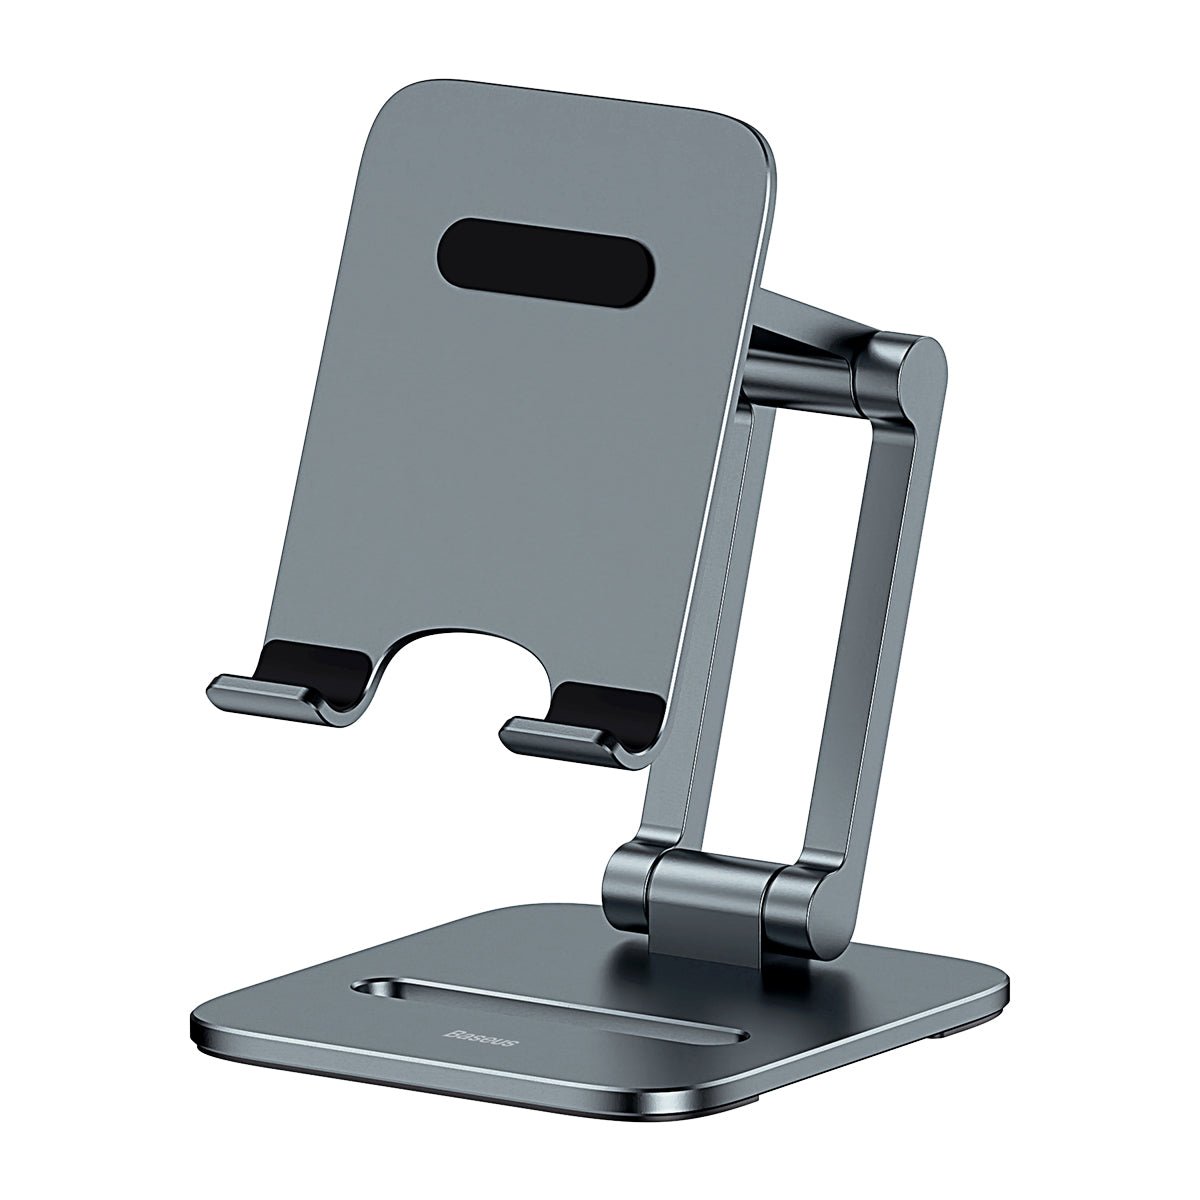 Baseus Desktop Biaxial Foldable and Adjustable Metal Stand for Phones